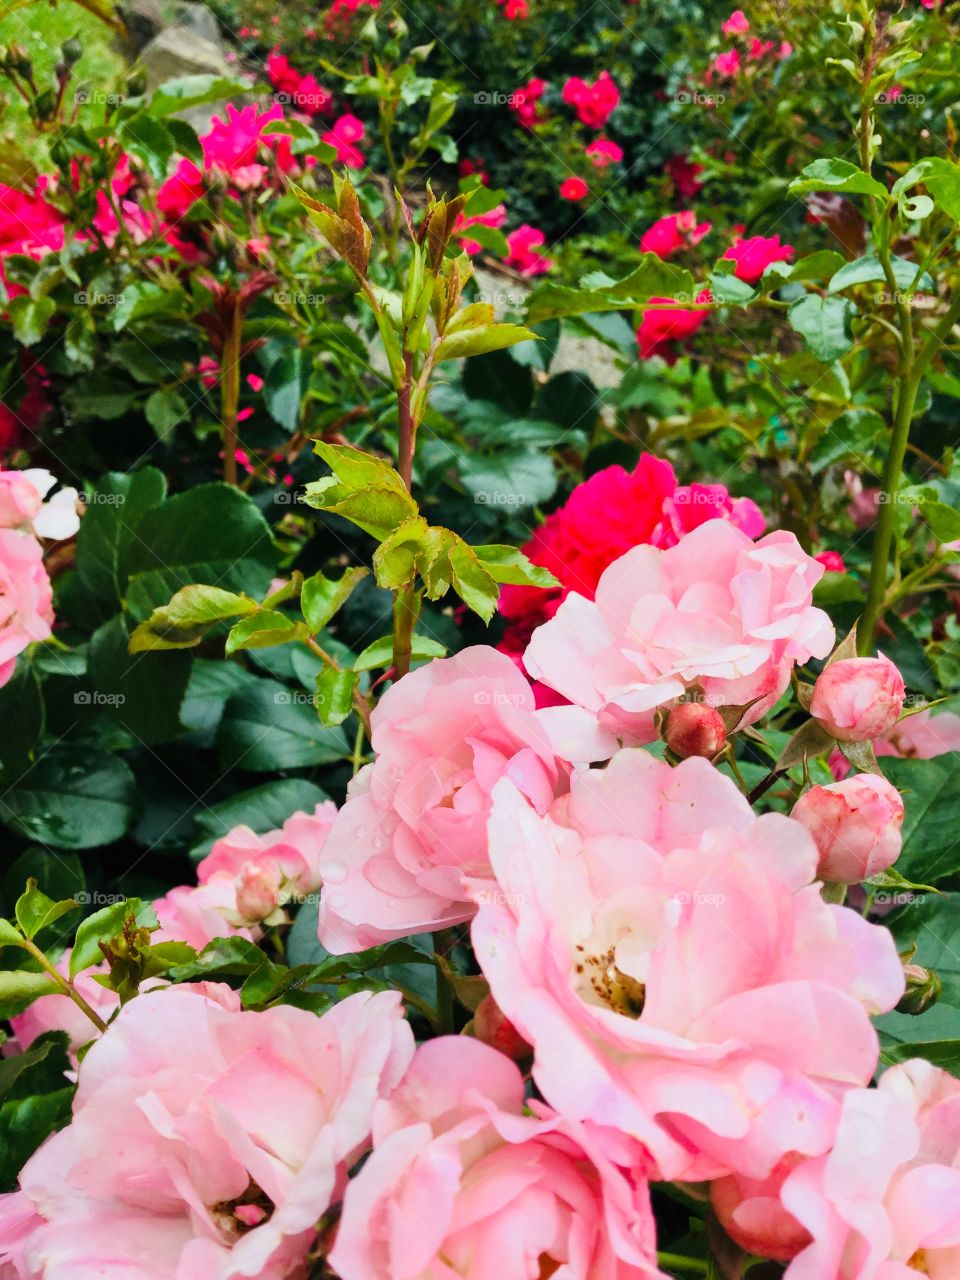 This shot uses an angle that shows a lot of rose bushes. The colours of the roses are two shades of pink.